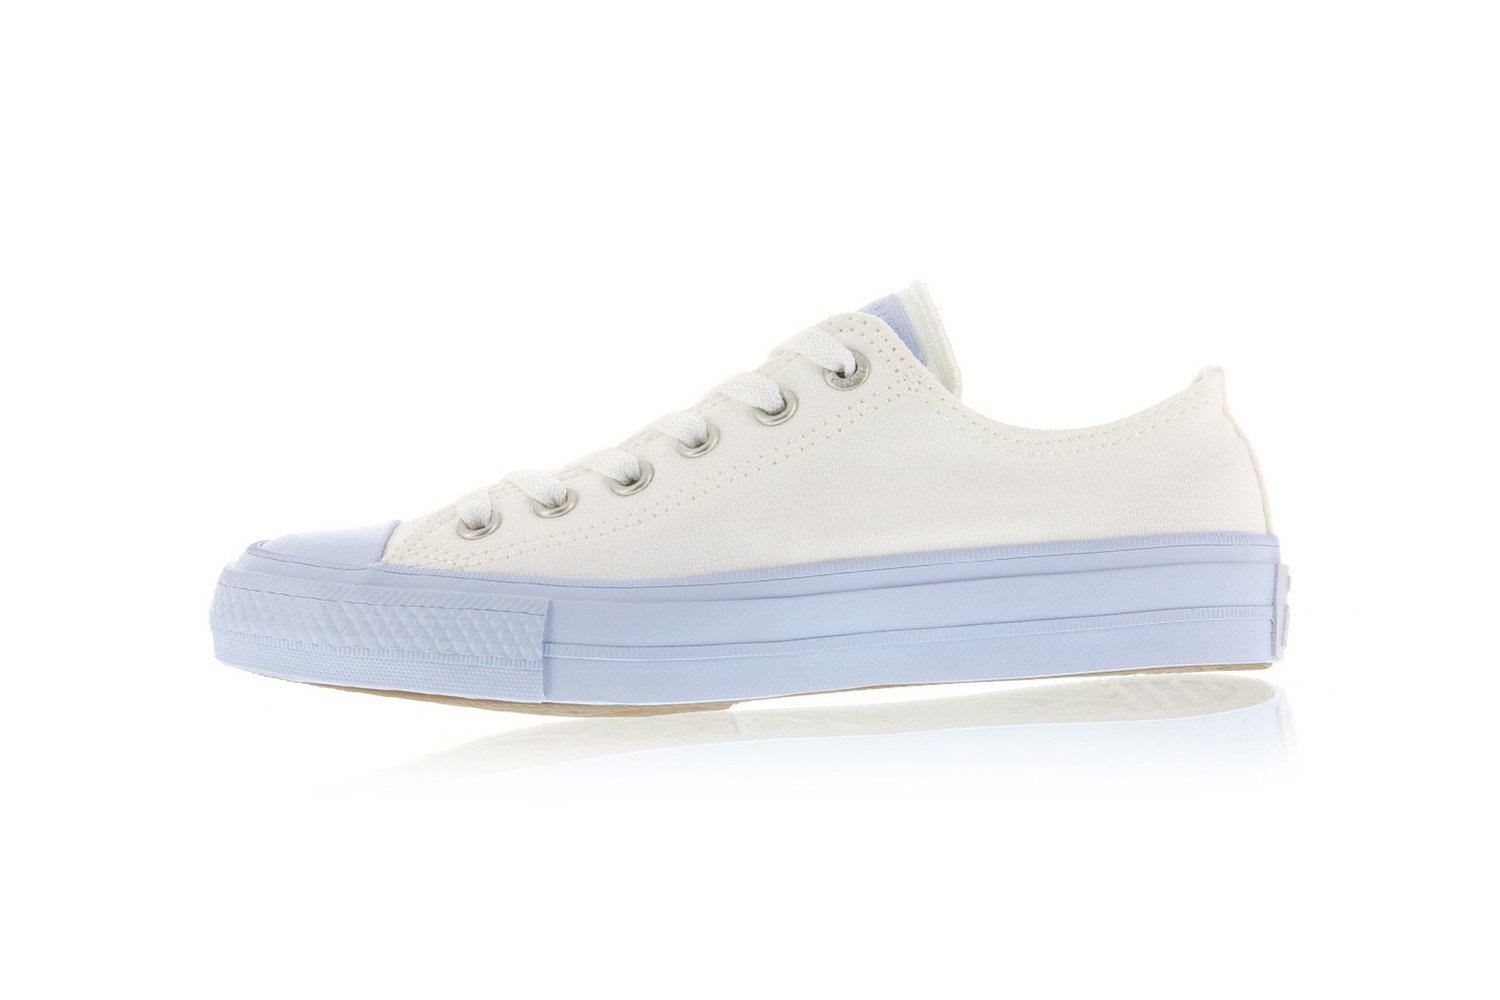 Converse Colors the Sole Pastel on a New Chuck Taylor All Star Pack — CNK  Daily (ChicksNKicks)